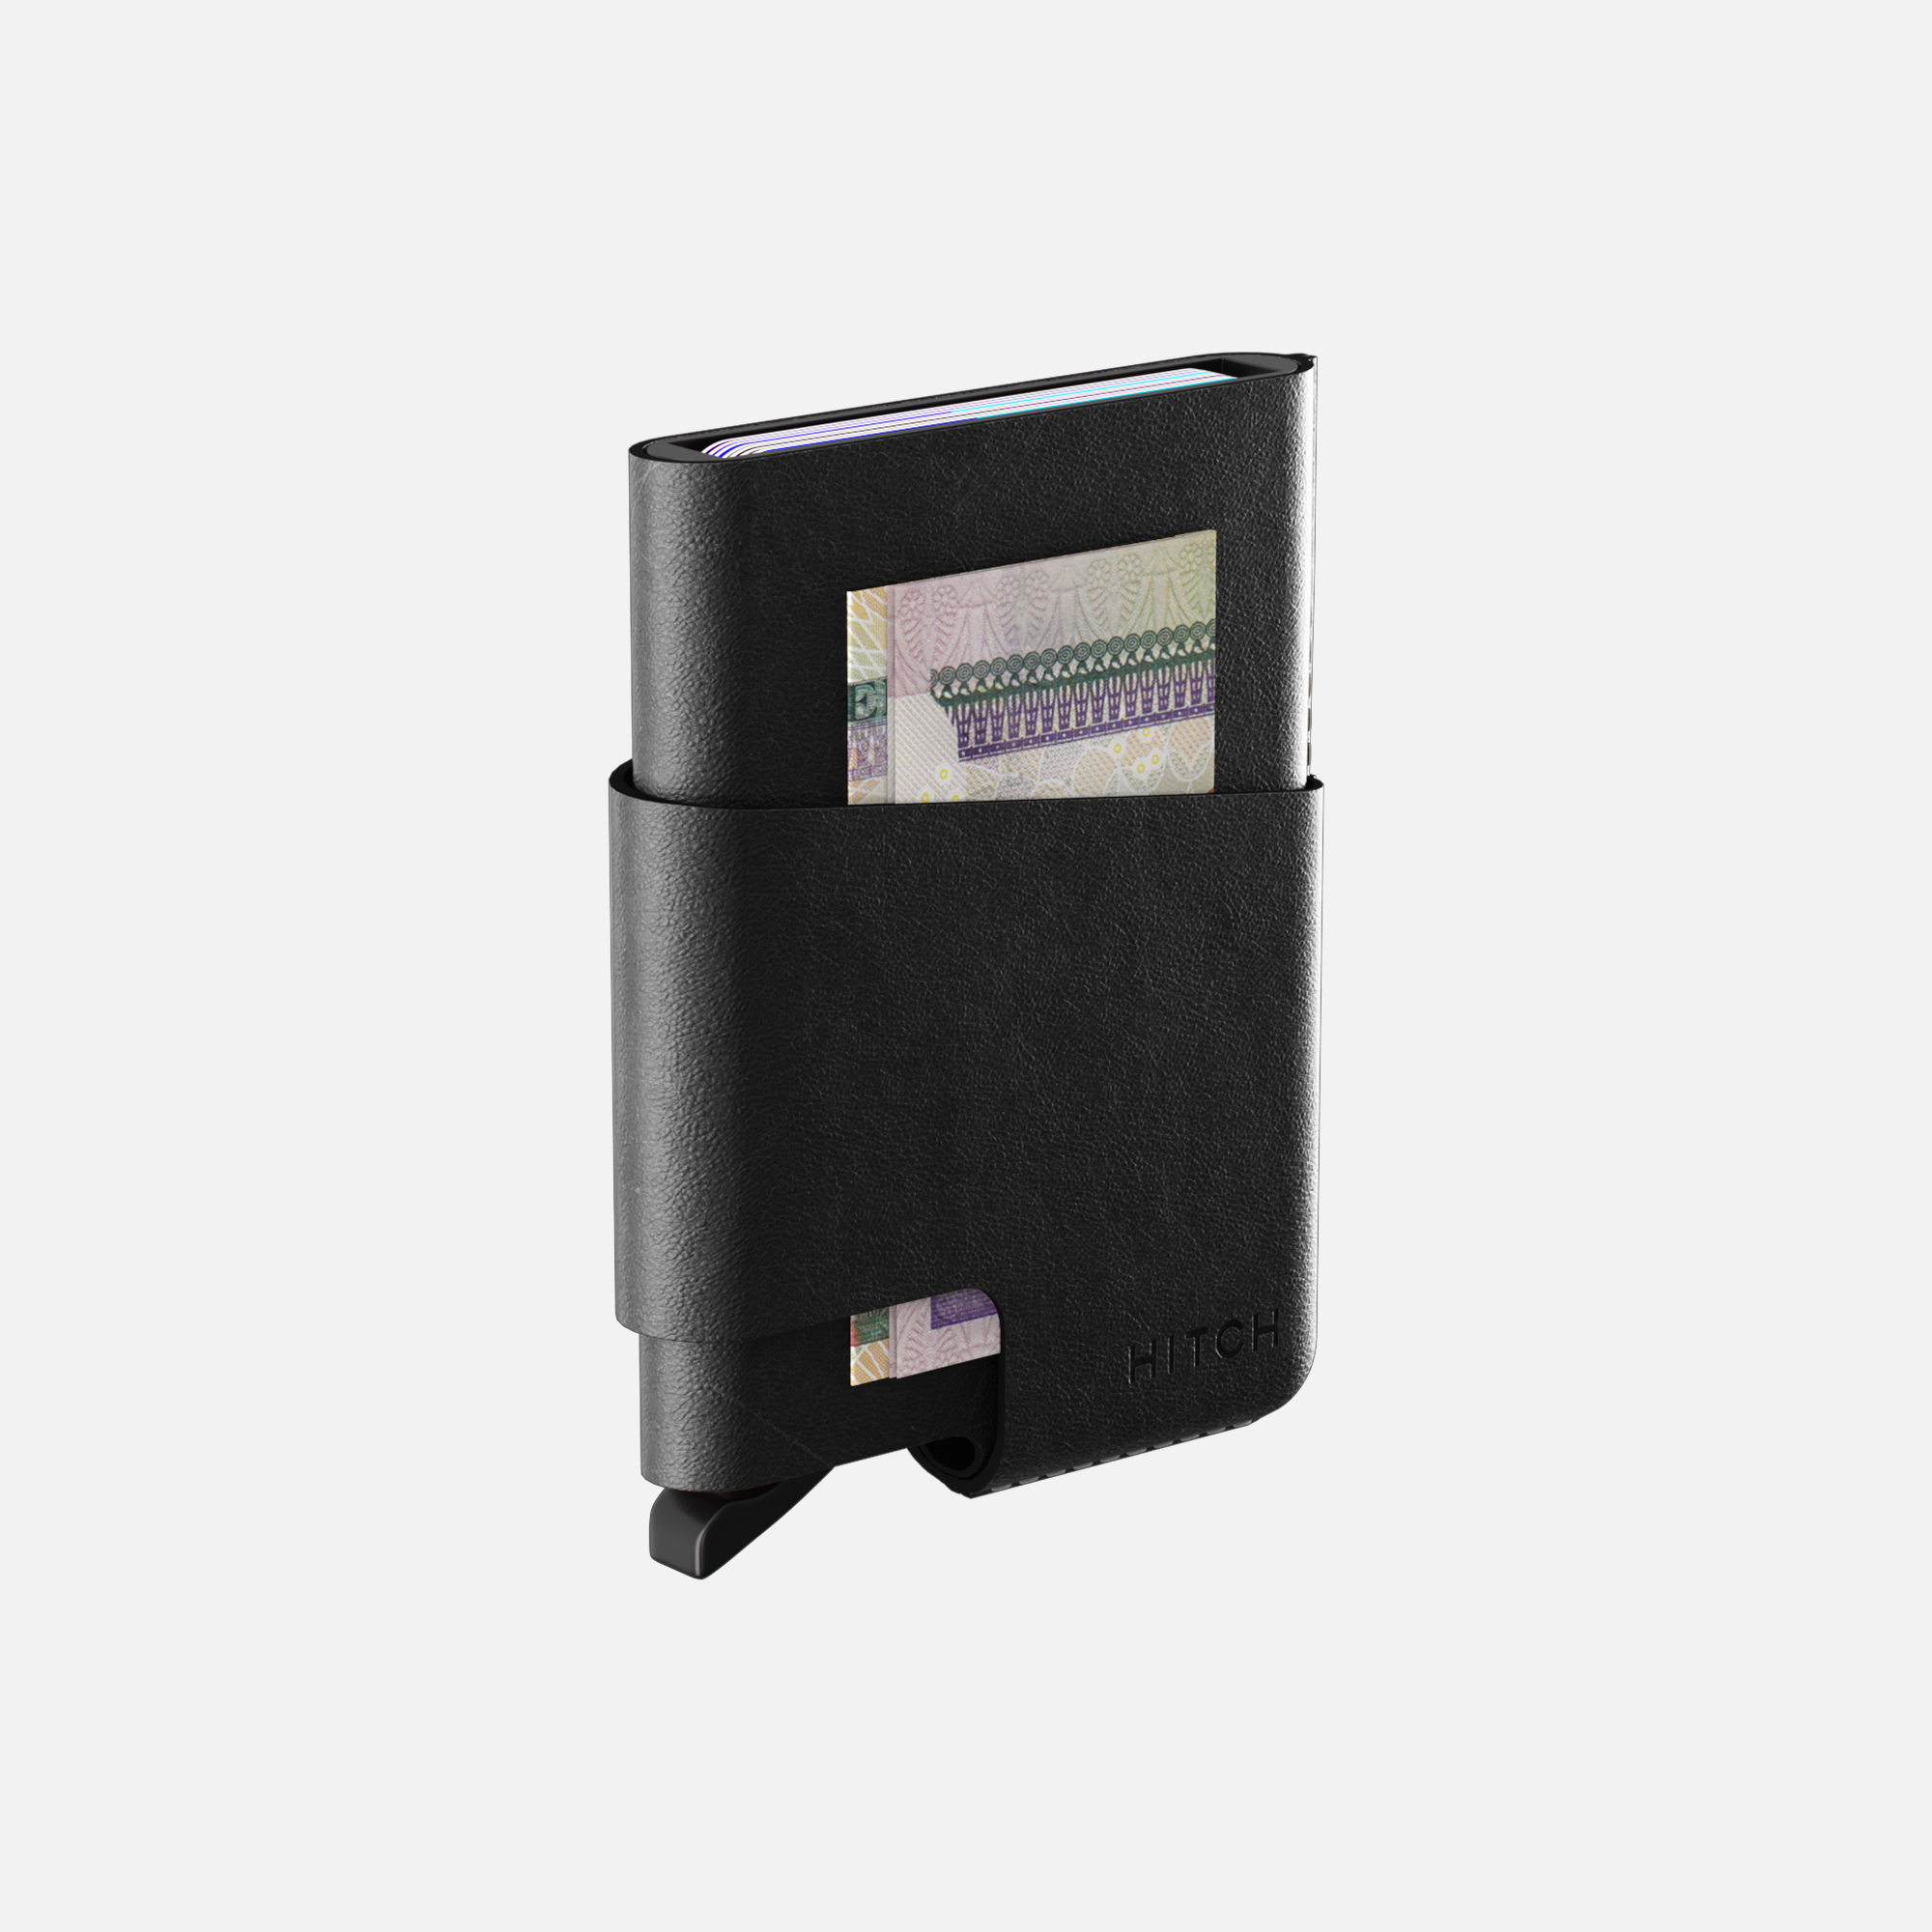 Minimalist black wallet with credit card and cash visible.